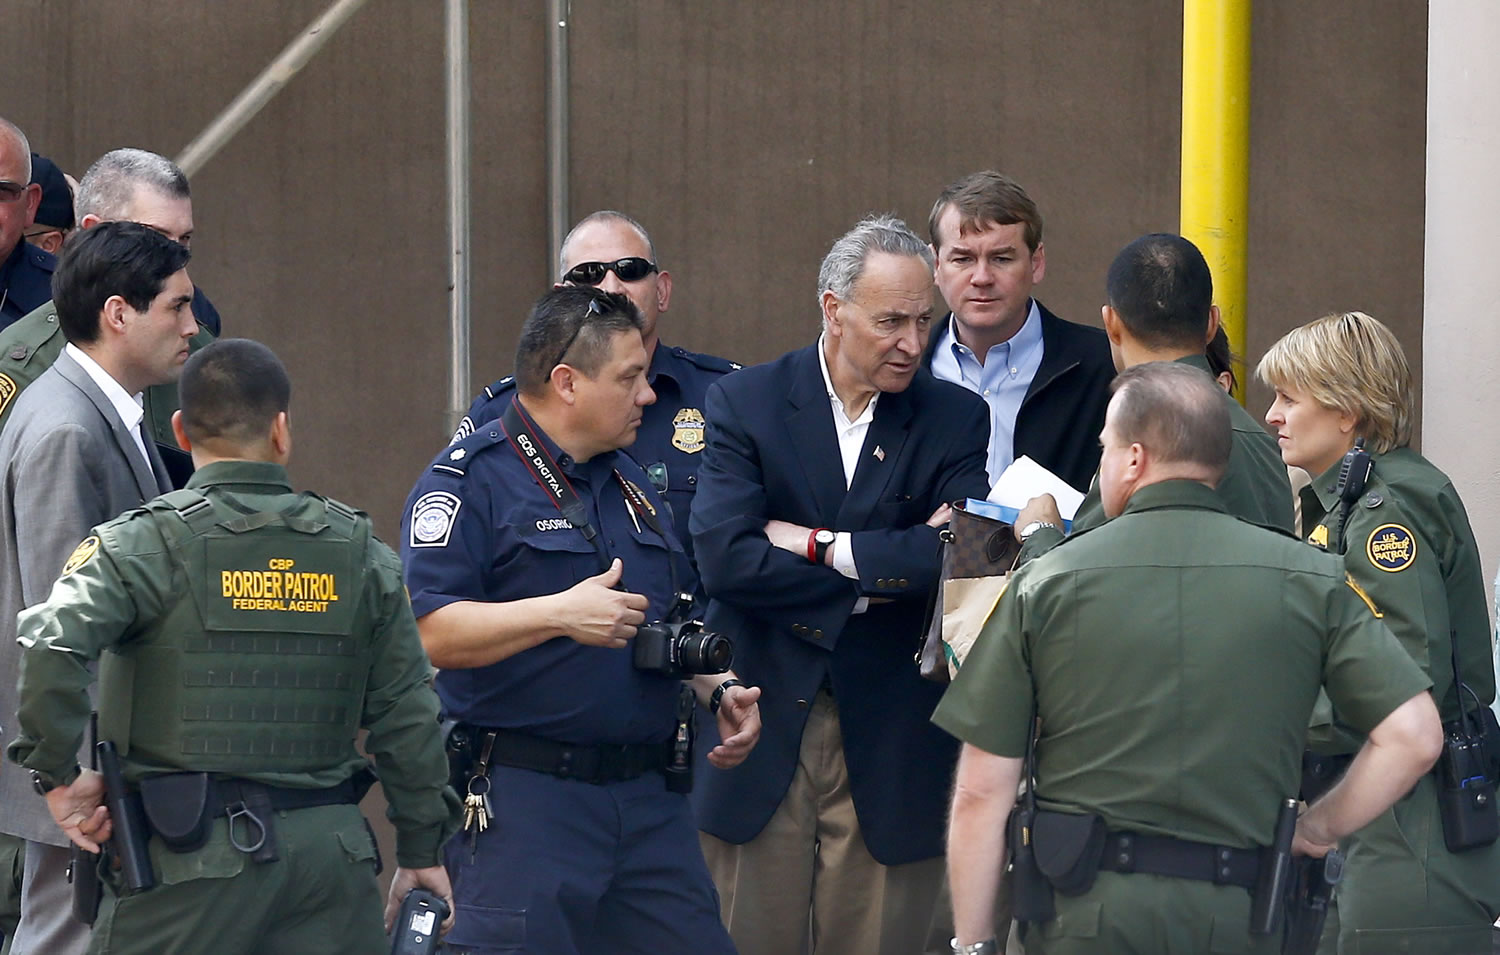 Sen. Chuck Schumer, D-NY, center, and Sen. Michael Bennett, D-CO, rear, speak with U.S. Border Patrol agents and U.S. Customs and Border Protection agents   during their tour of the Mexico border with the United States on Wednesday, March 27, 2013, in Nogales, Ariz. (AP Photo/Ross D.